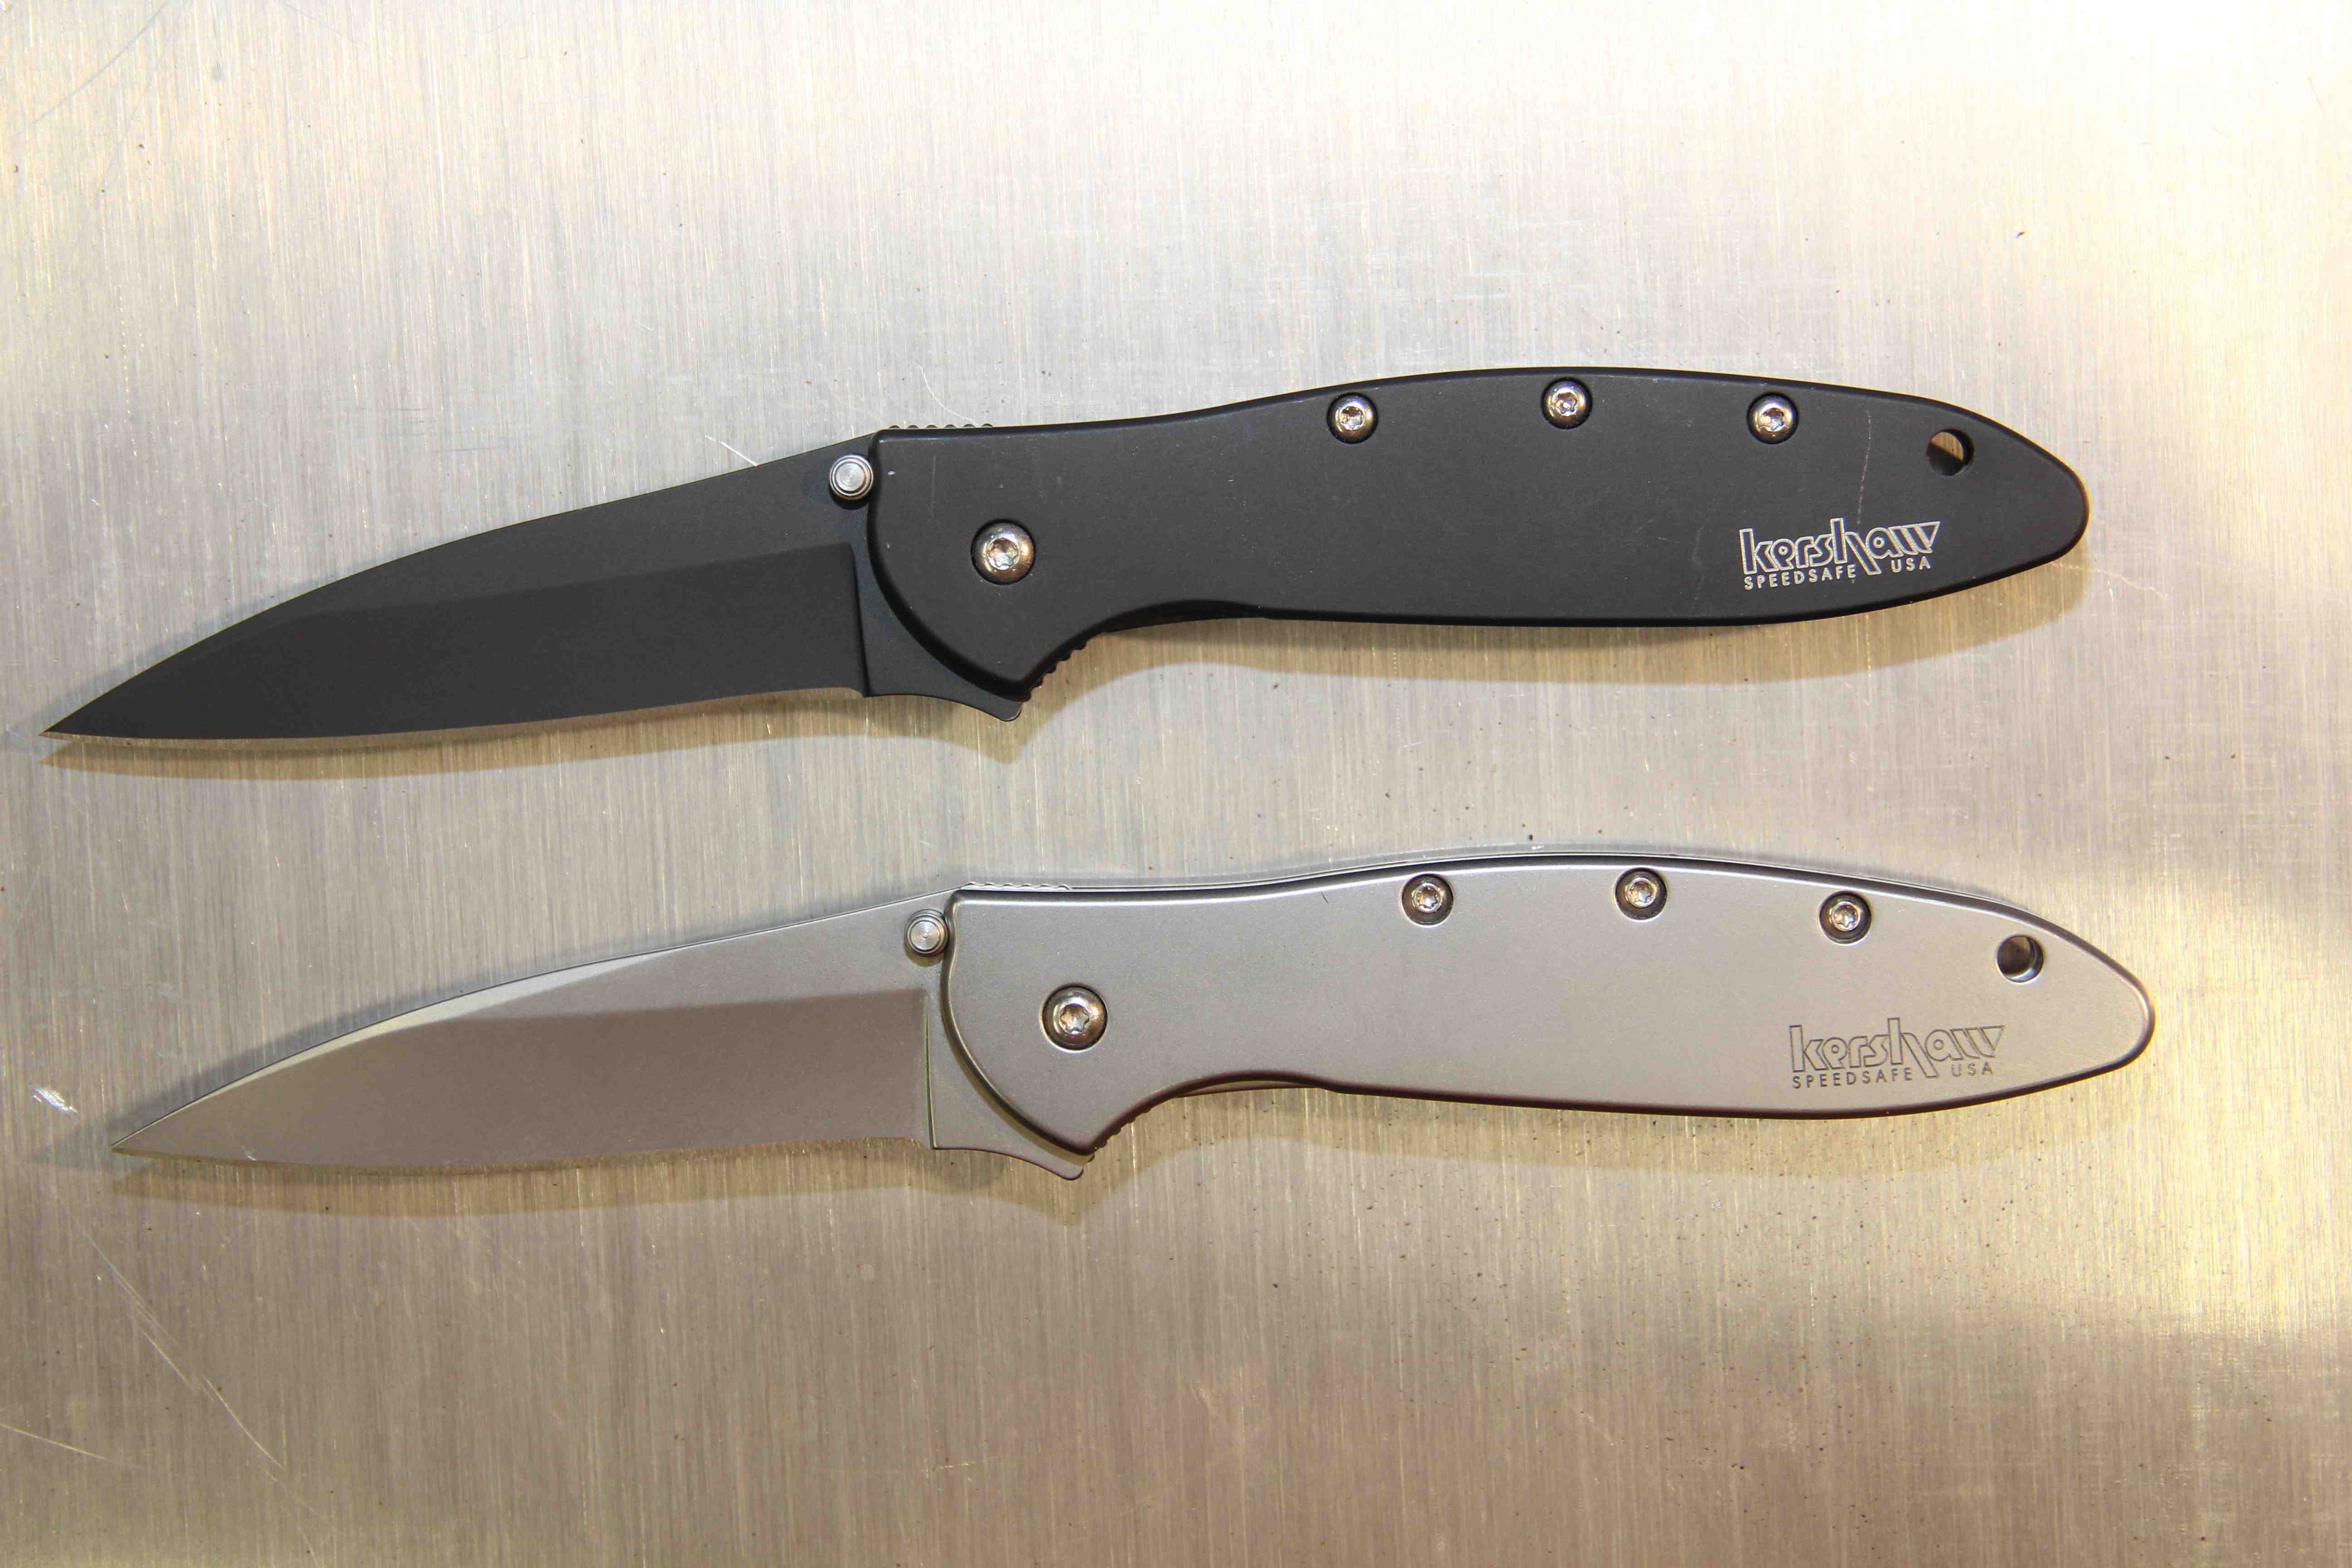 A razor-sharp edge on a Kershaw pocket knife with the trusted